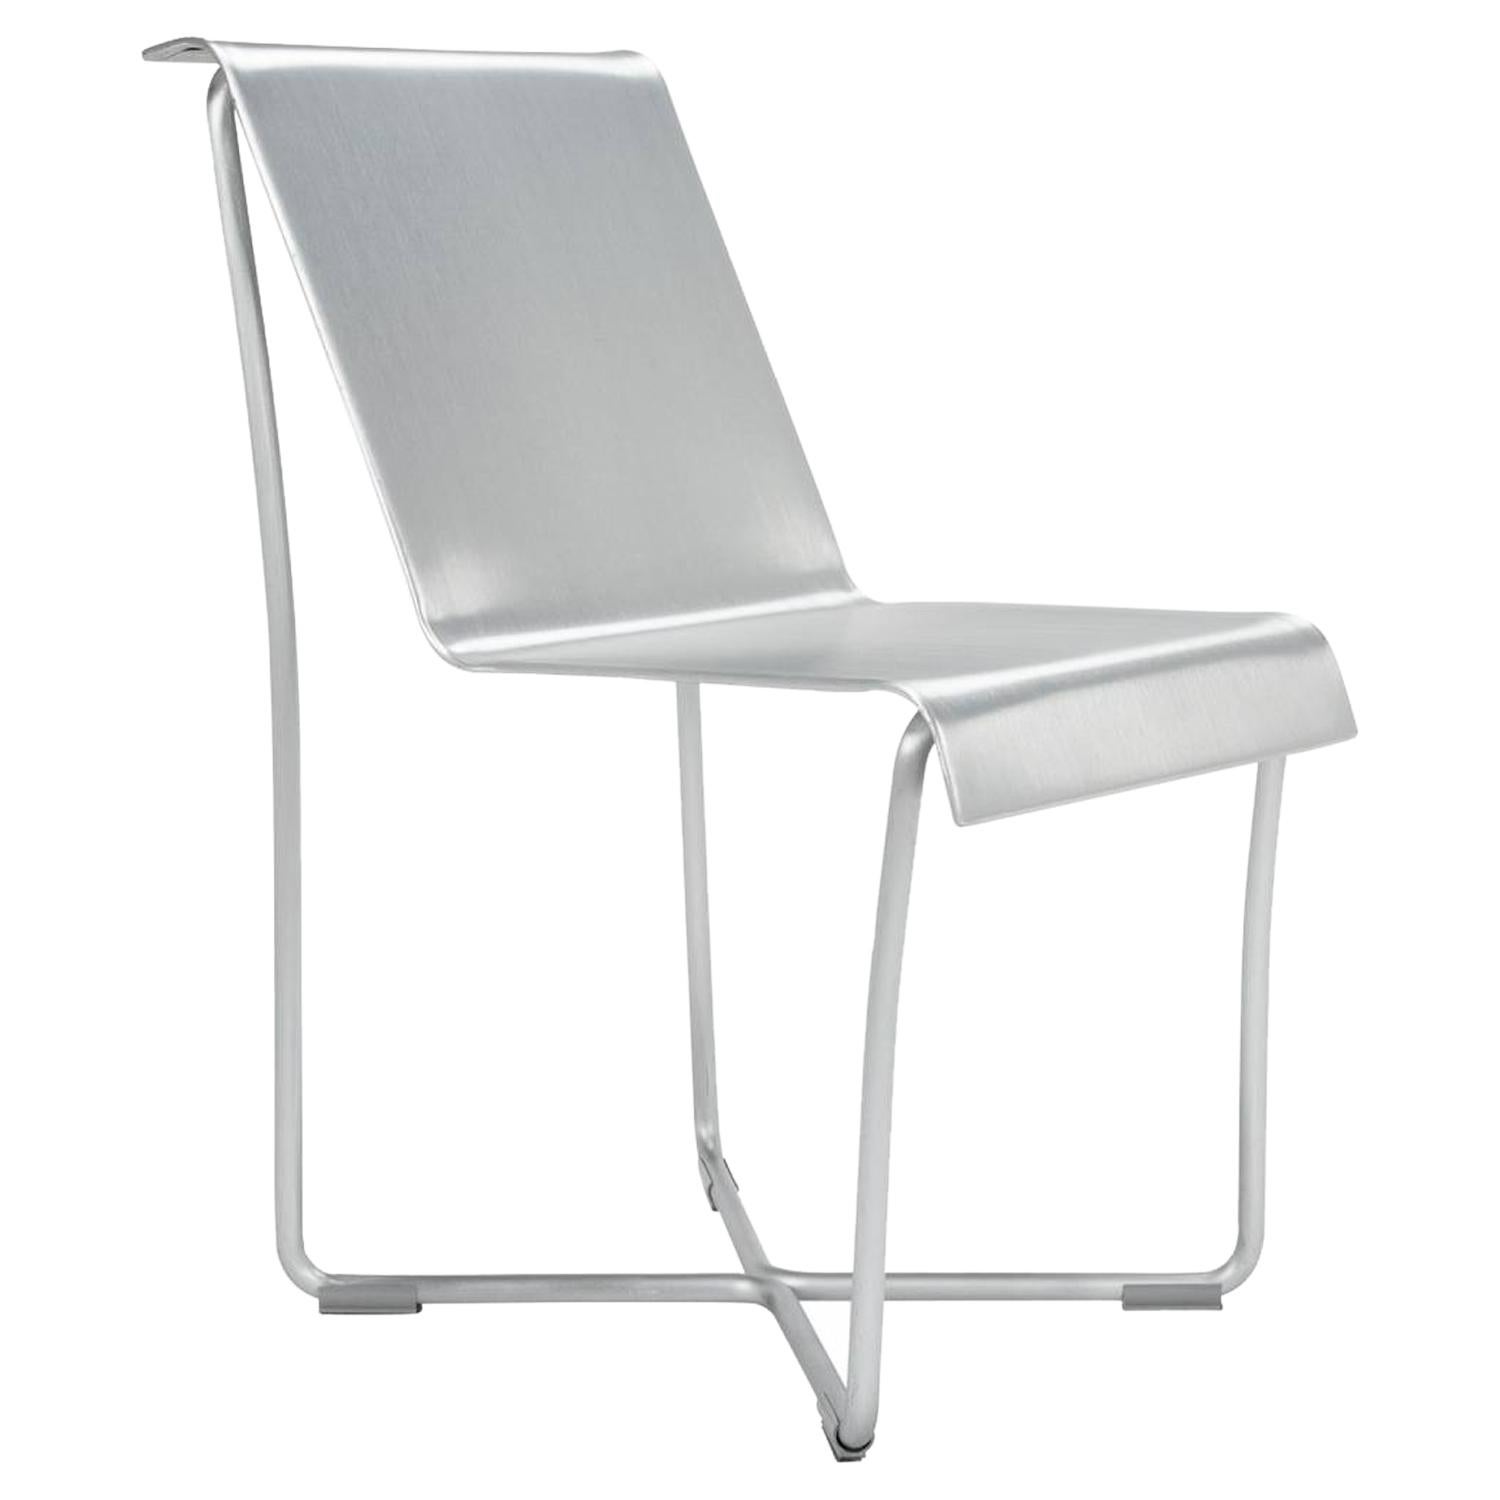 Emeco Superlight Chair in Brushed Aluminum by Frank Gehry For Sale at  1stDibs